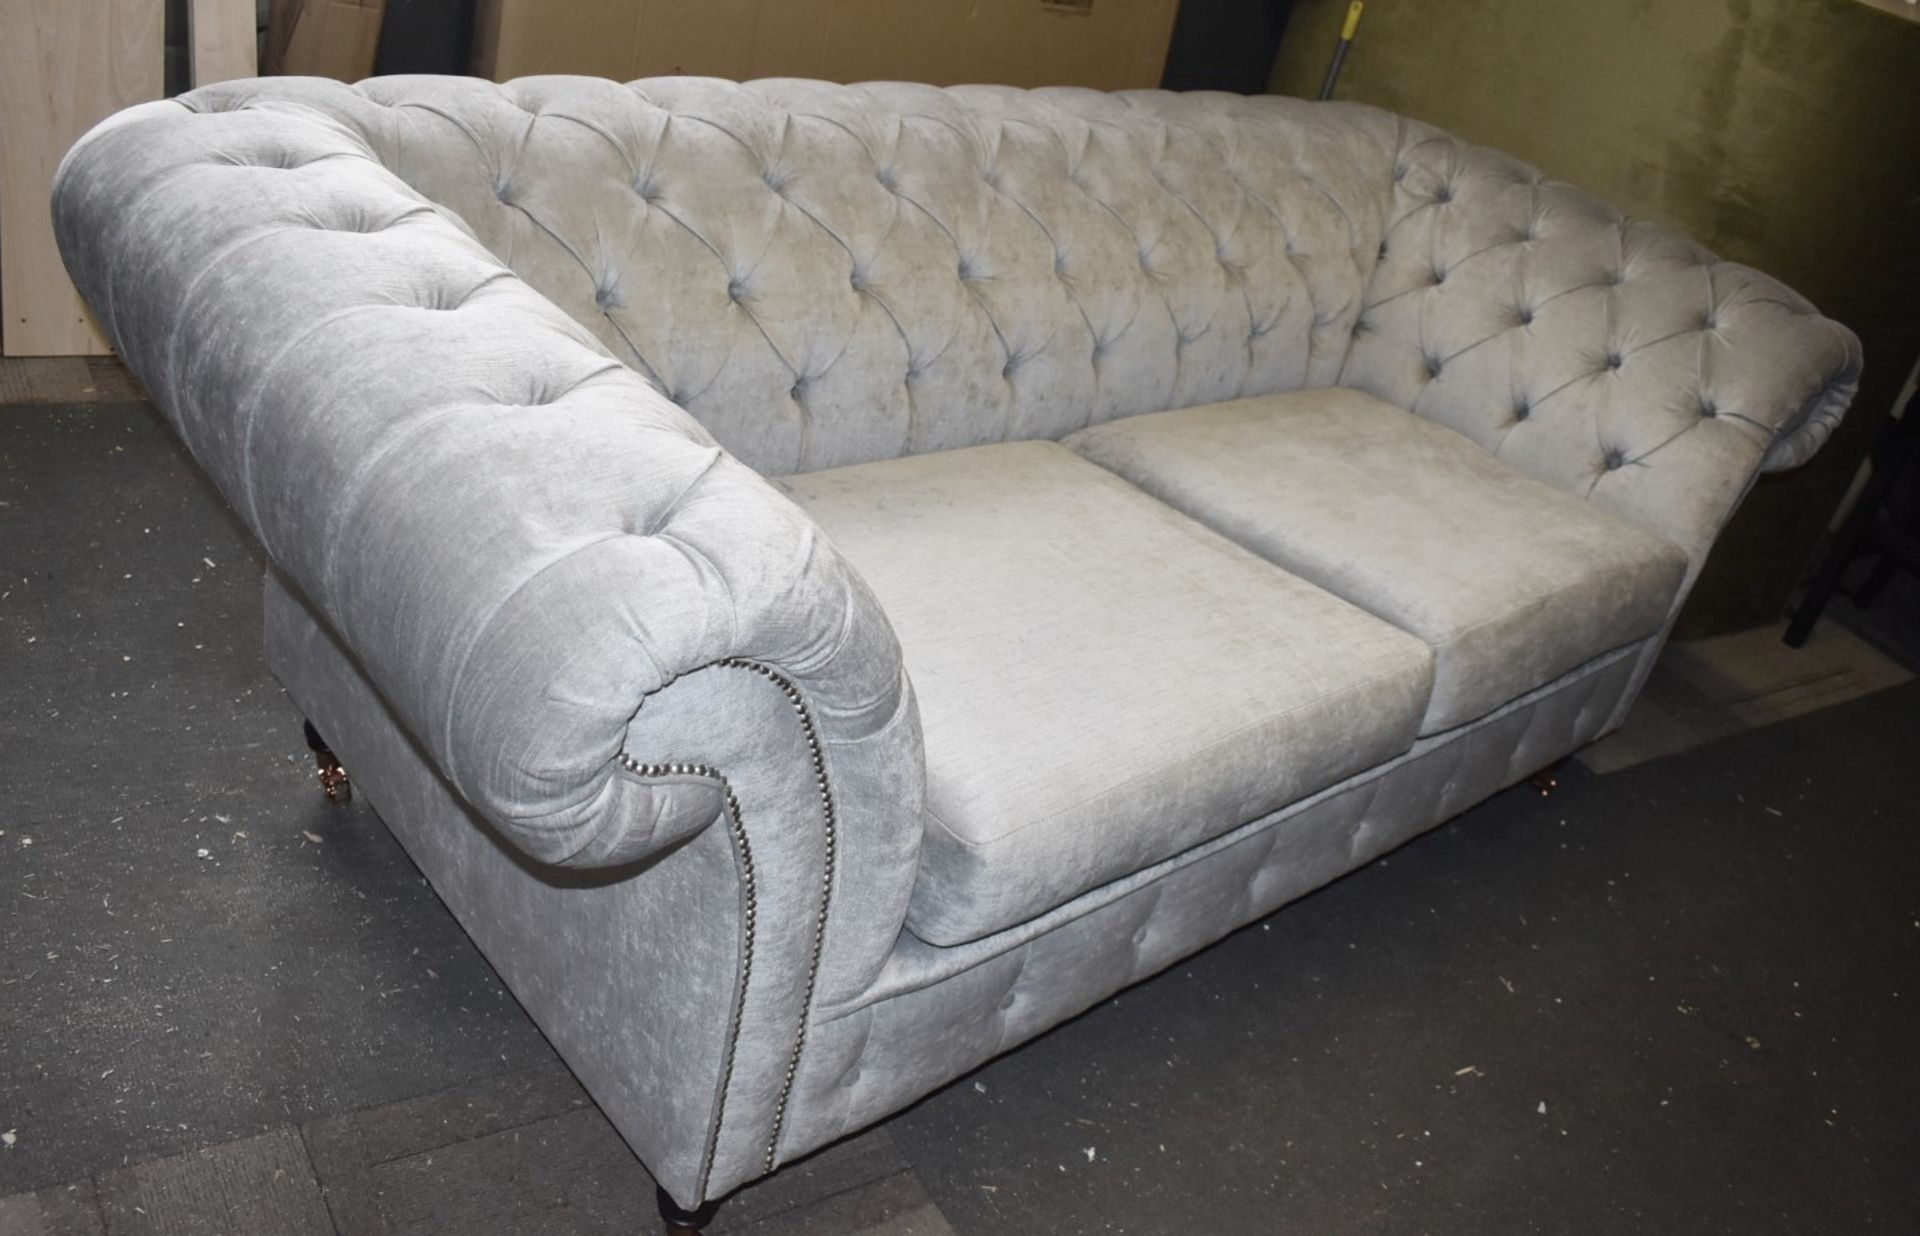 1 x Chesterfield-style Velvet Upholstered Sofa, on Castors, 2.2-Metres Wide  - Luxury Furniture - Image 2 of 14